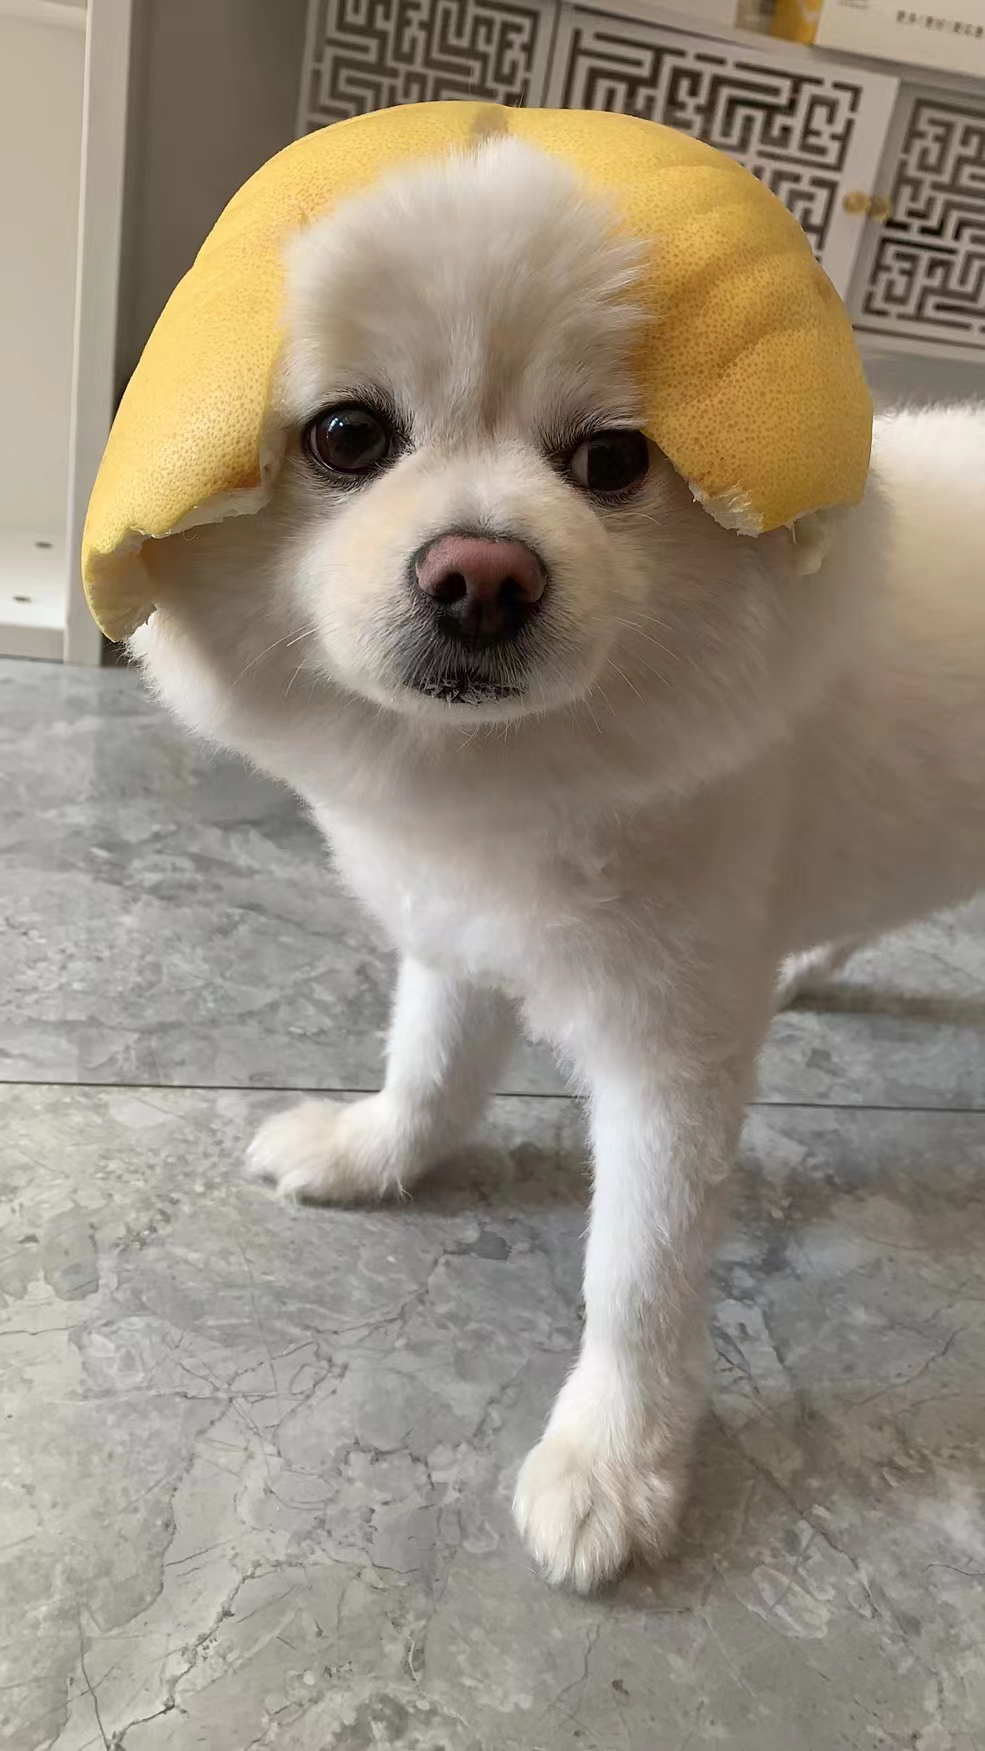 a dog is wearing a Grapefruit